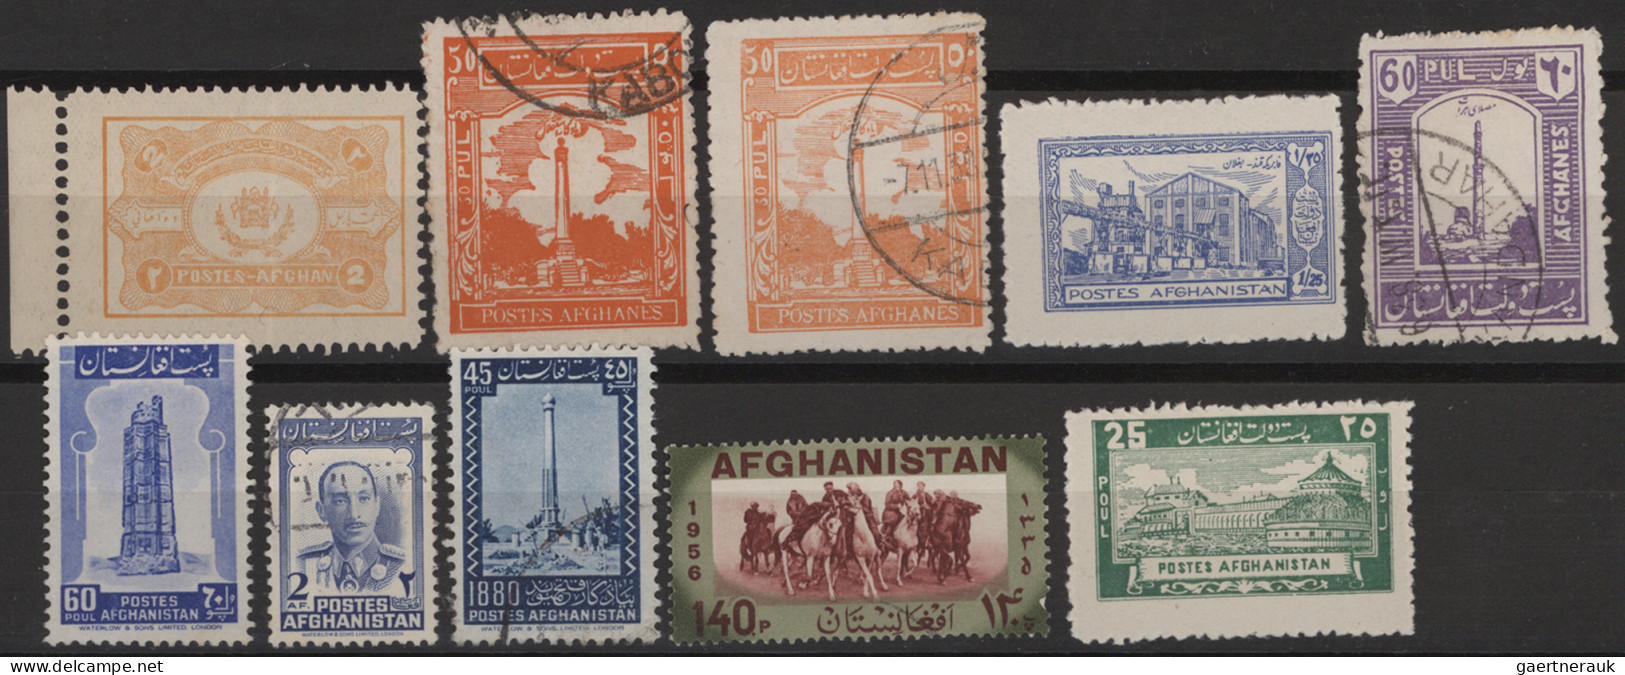 Afghanistan: 1910/1960's ca.: Collection and accumulation of mint and used stamp